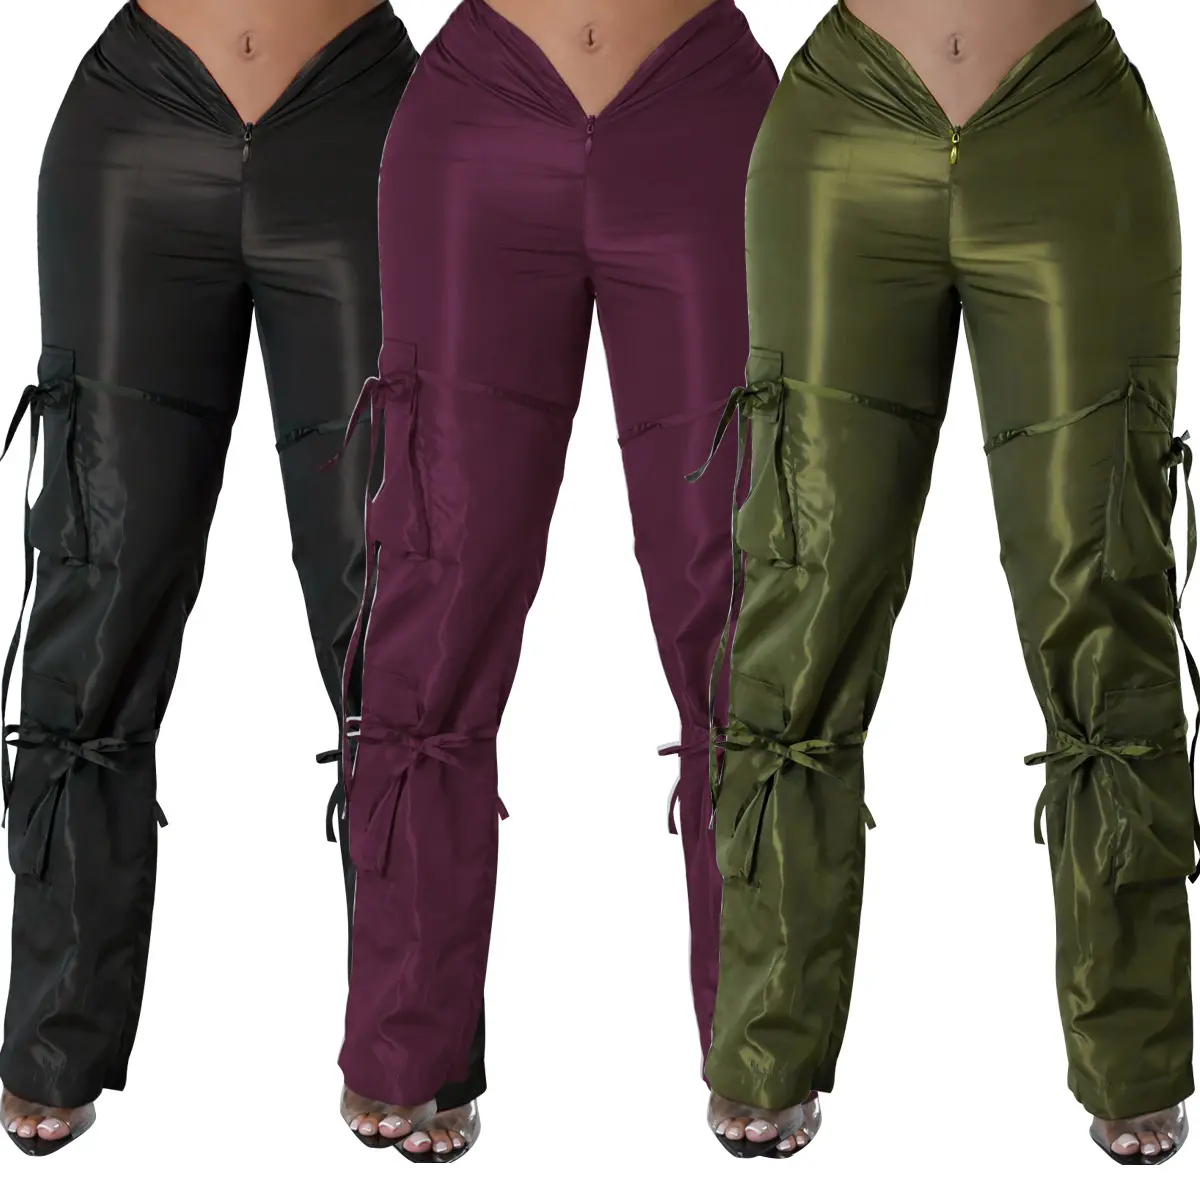 2023 New Arrivals Solid Color Cargo Pants For Women Streetwear Big Pocket Casual Pants Low Waist Baggy Women's Trousers Lady